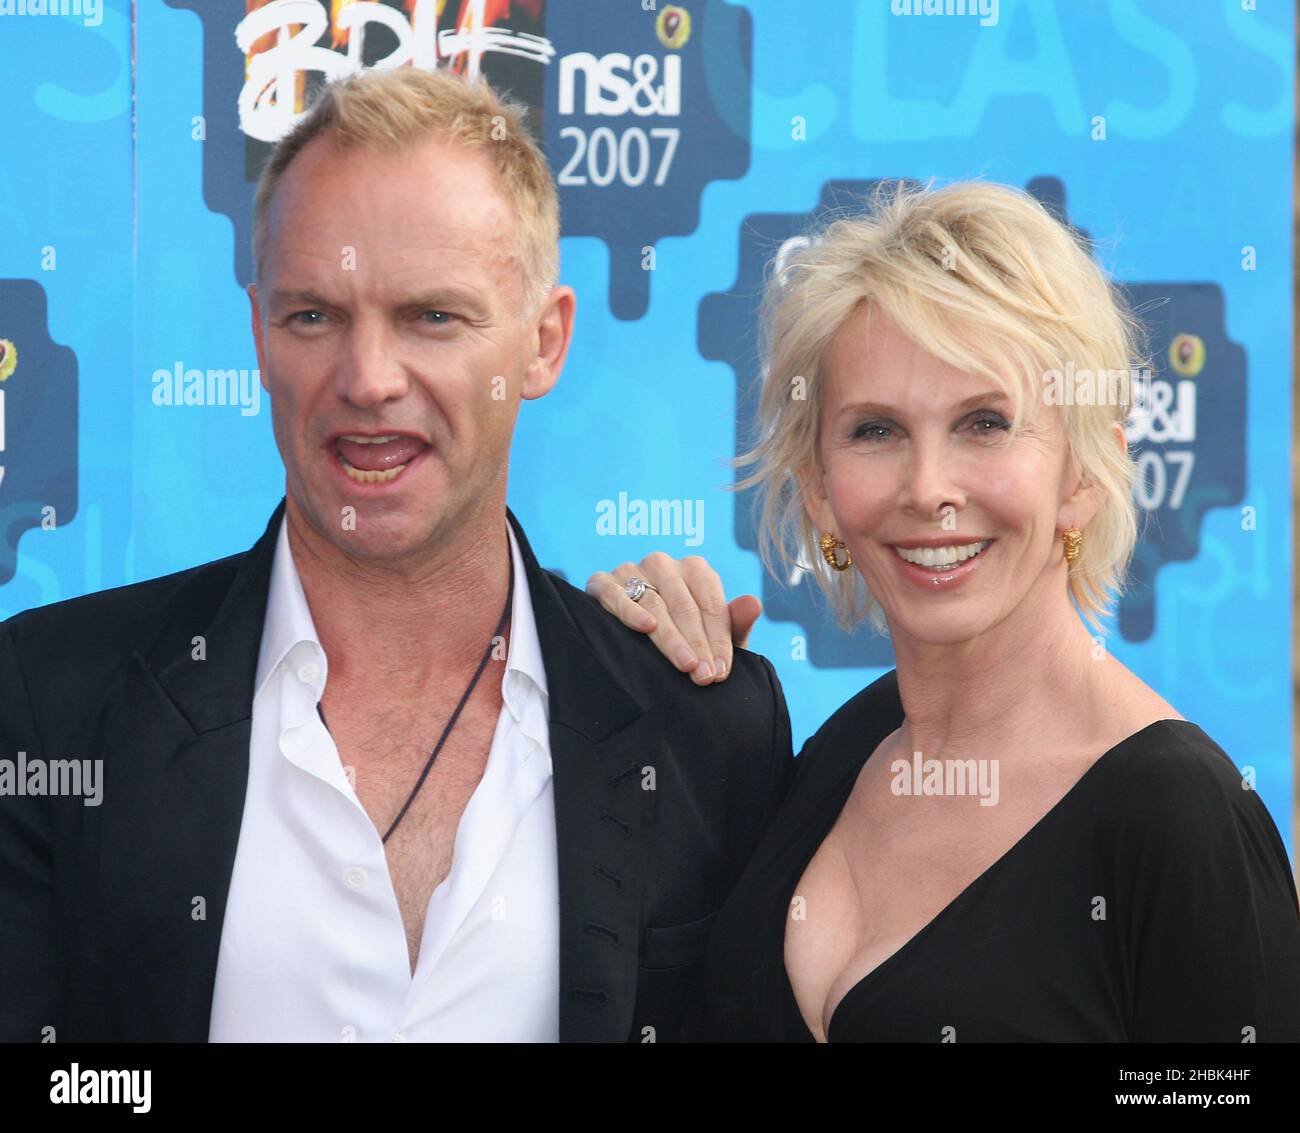 Sting and Trudie Styler pose in front of the boards at the Classical Brit Awards at the Royal Albert Hall in central London on May 3, 2007. Stock Photo